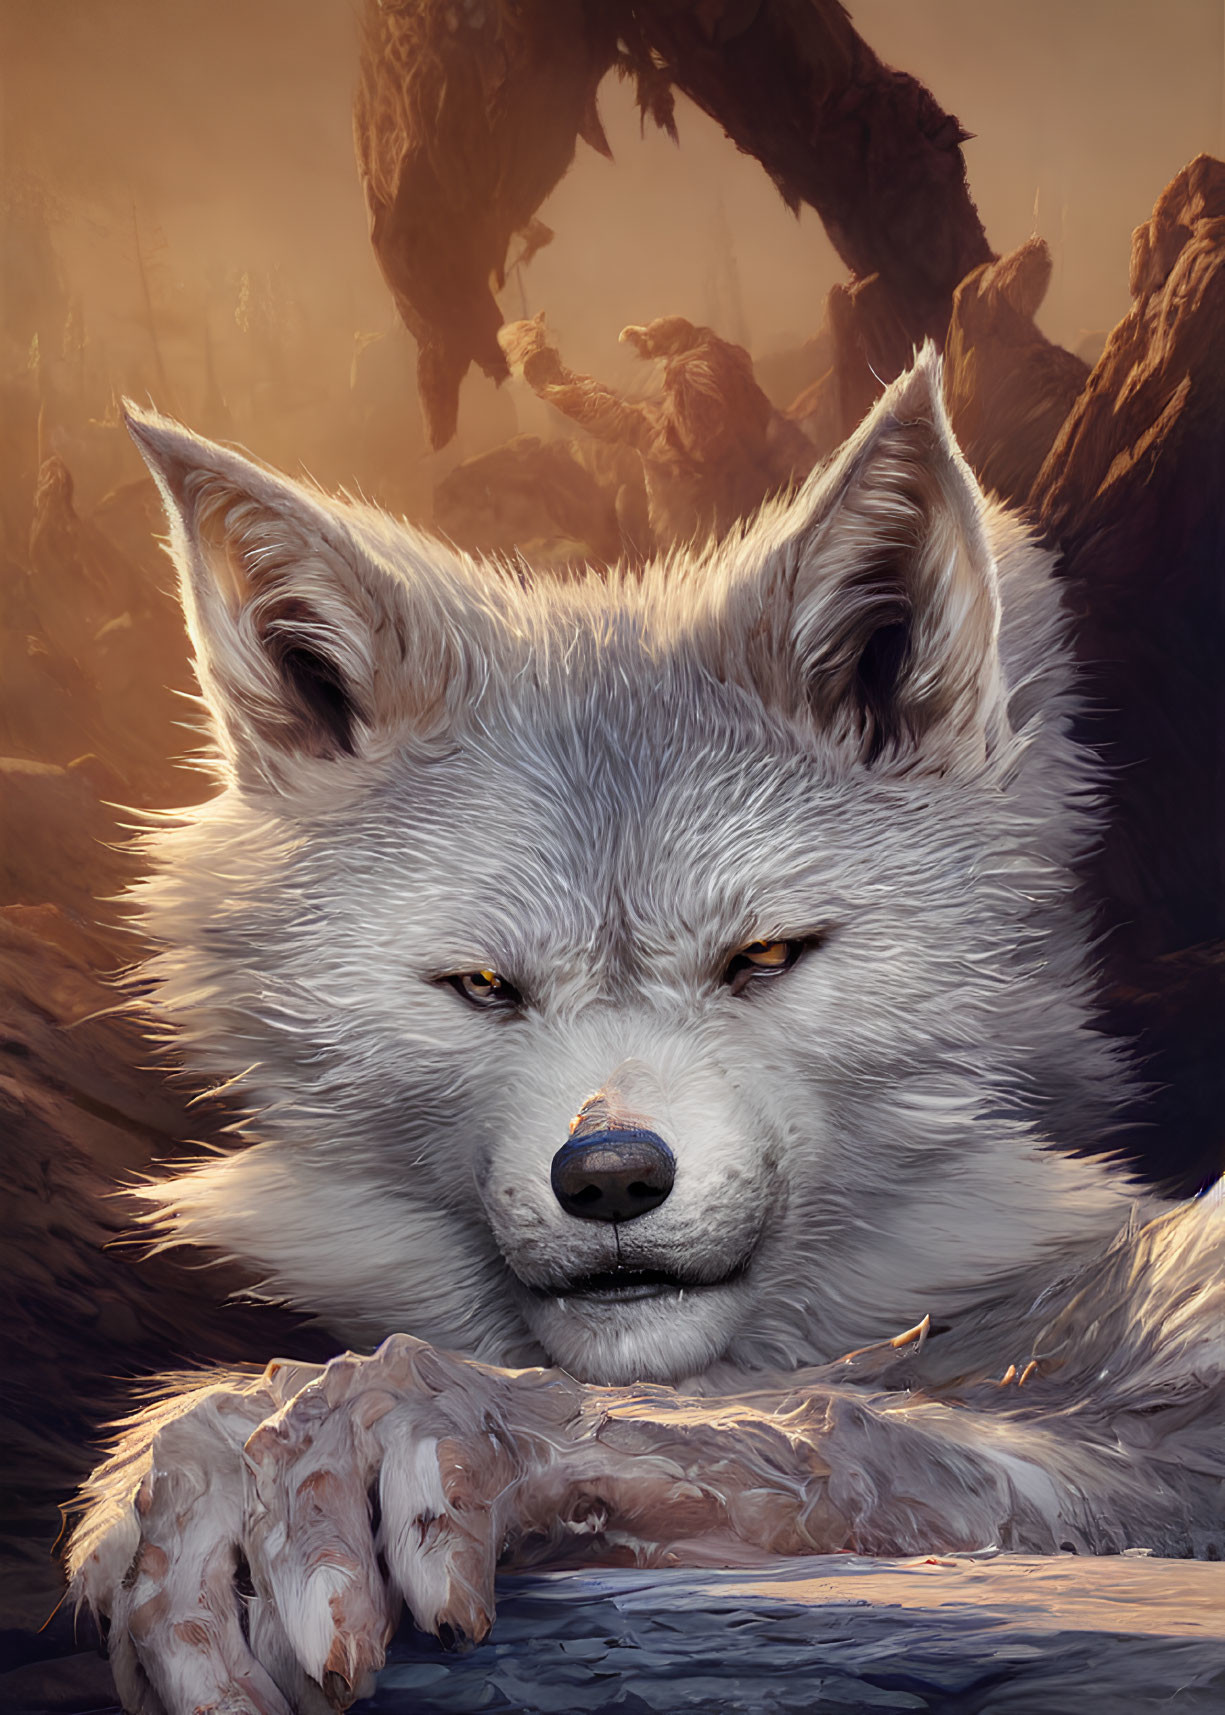 White wolf with yellow eyes in rocky landscape with shadowy figure